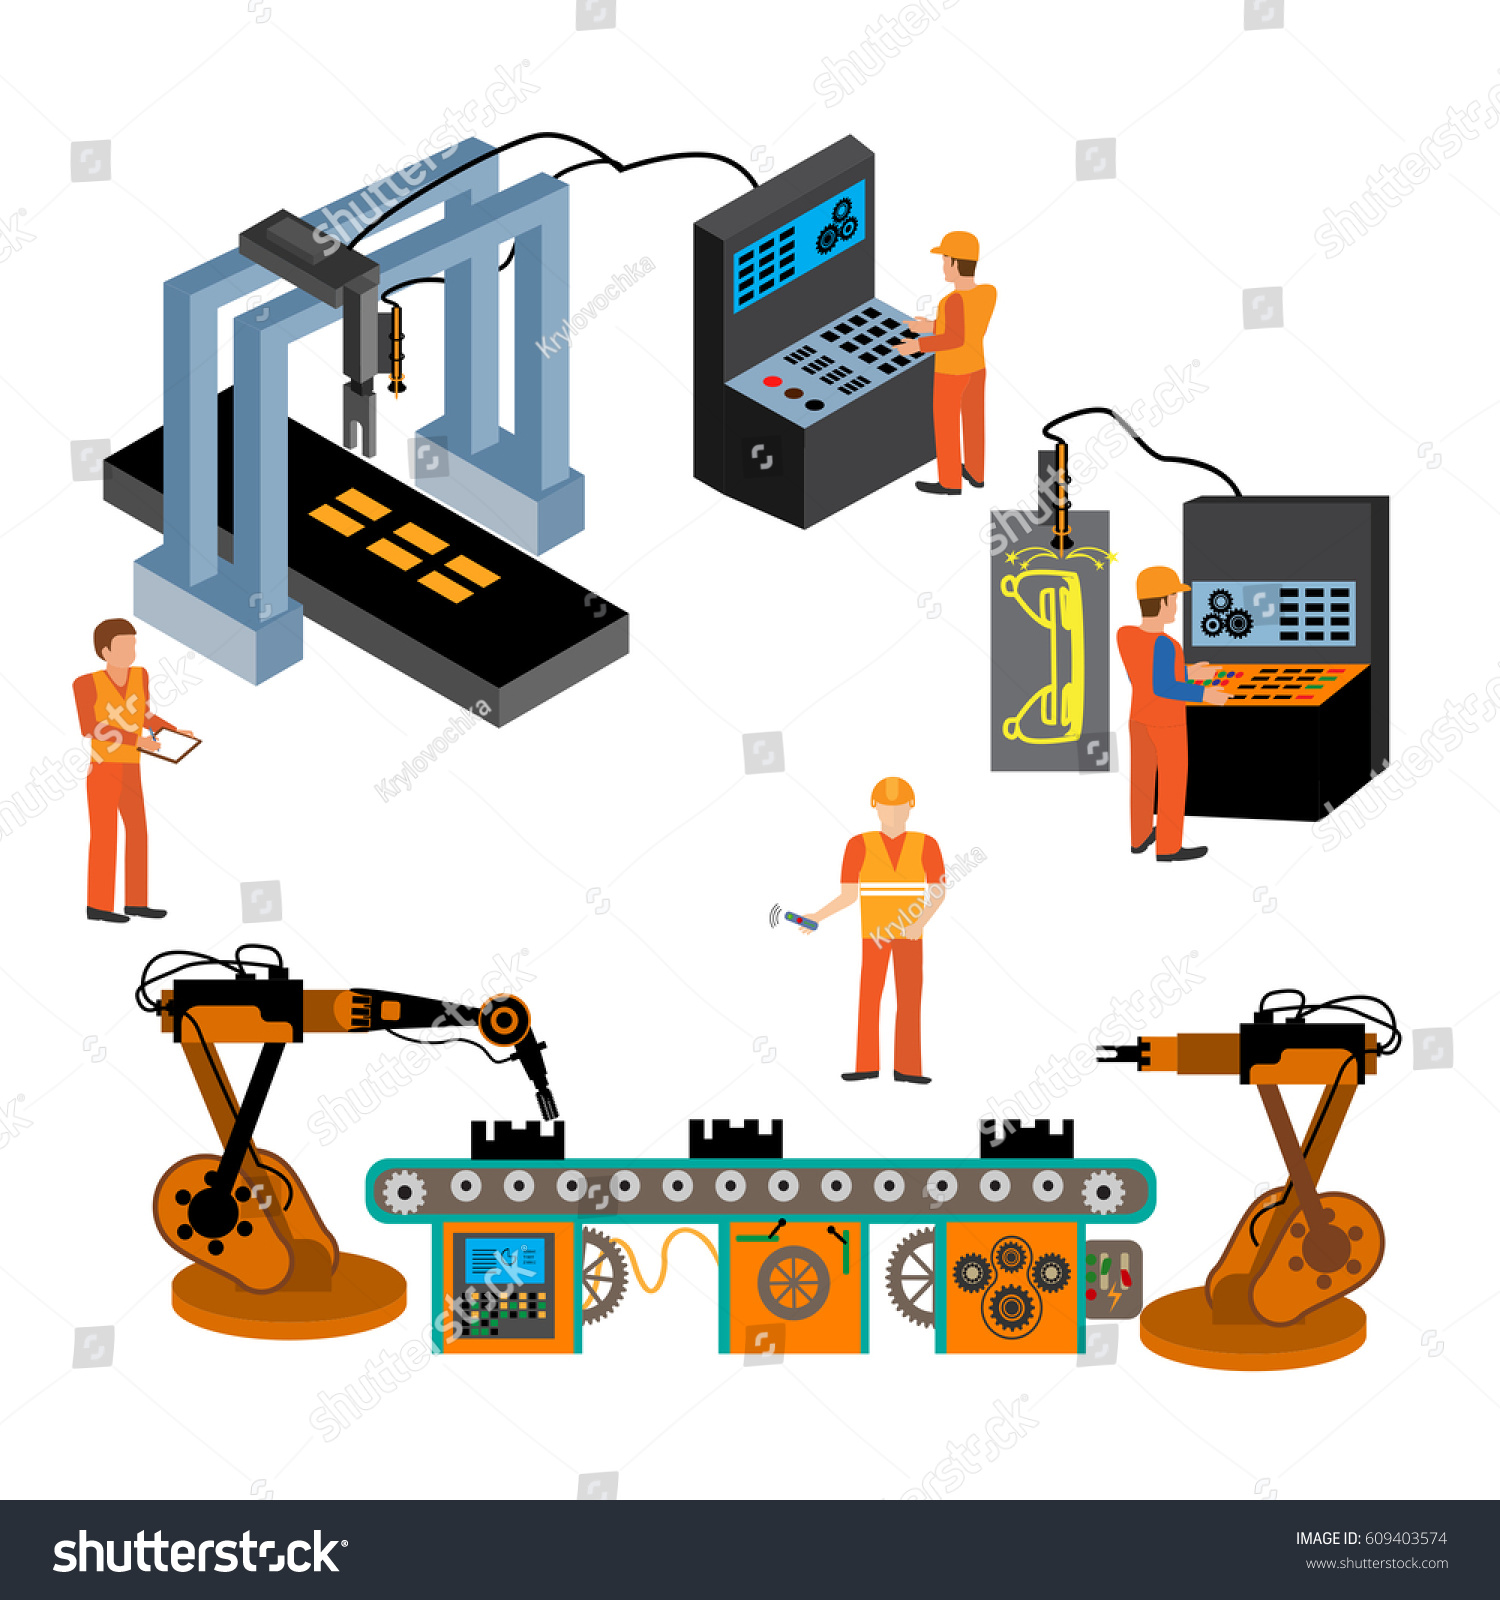 Production Process On Line Conveyorrobotic Assembly Stock Vector ...